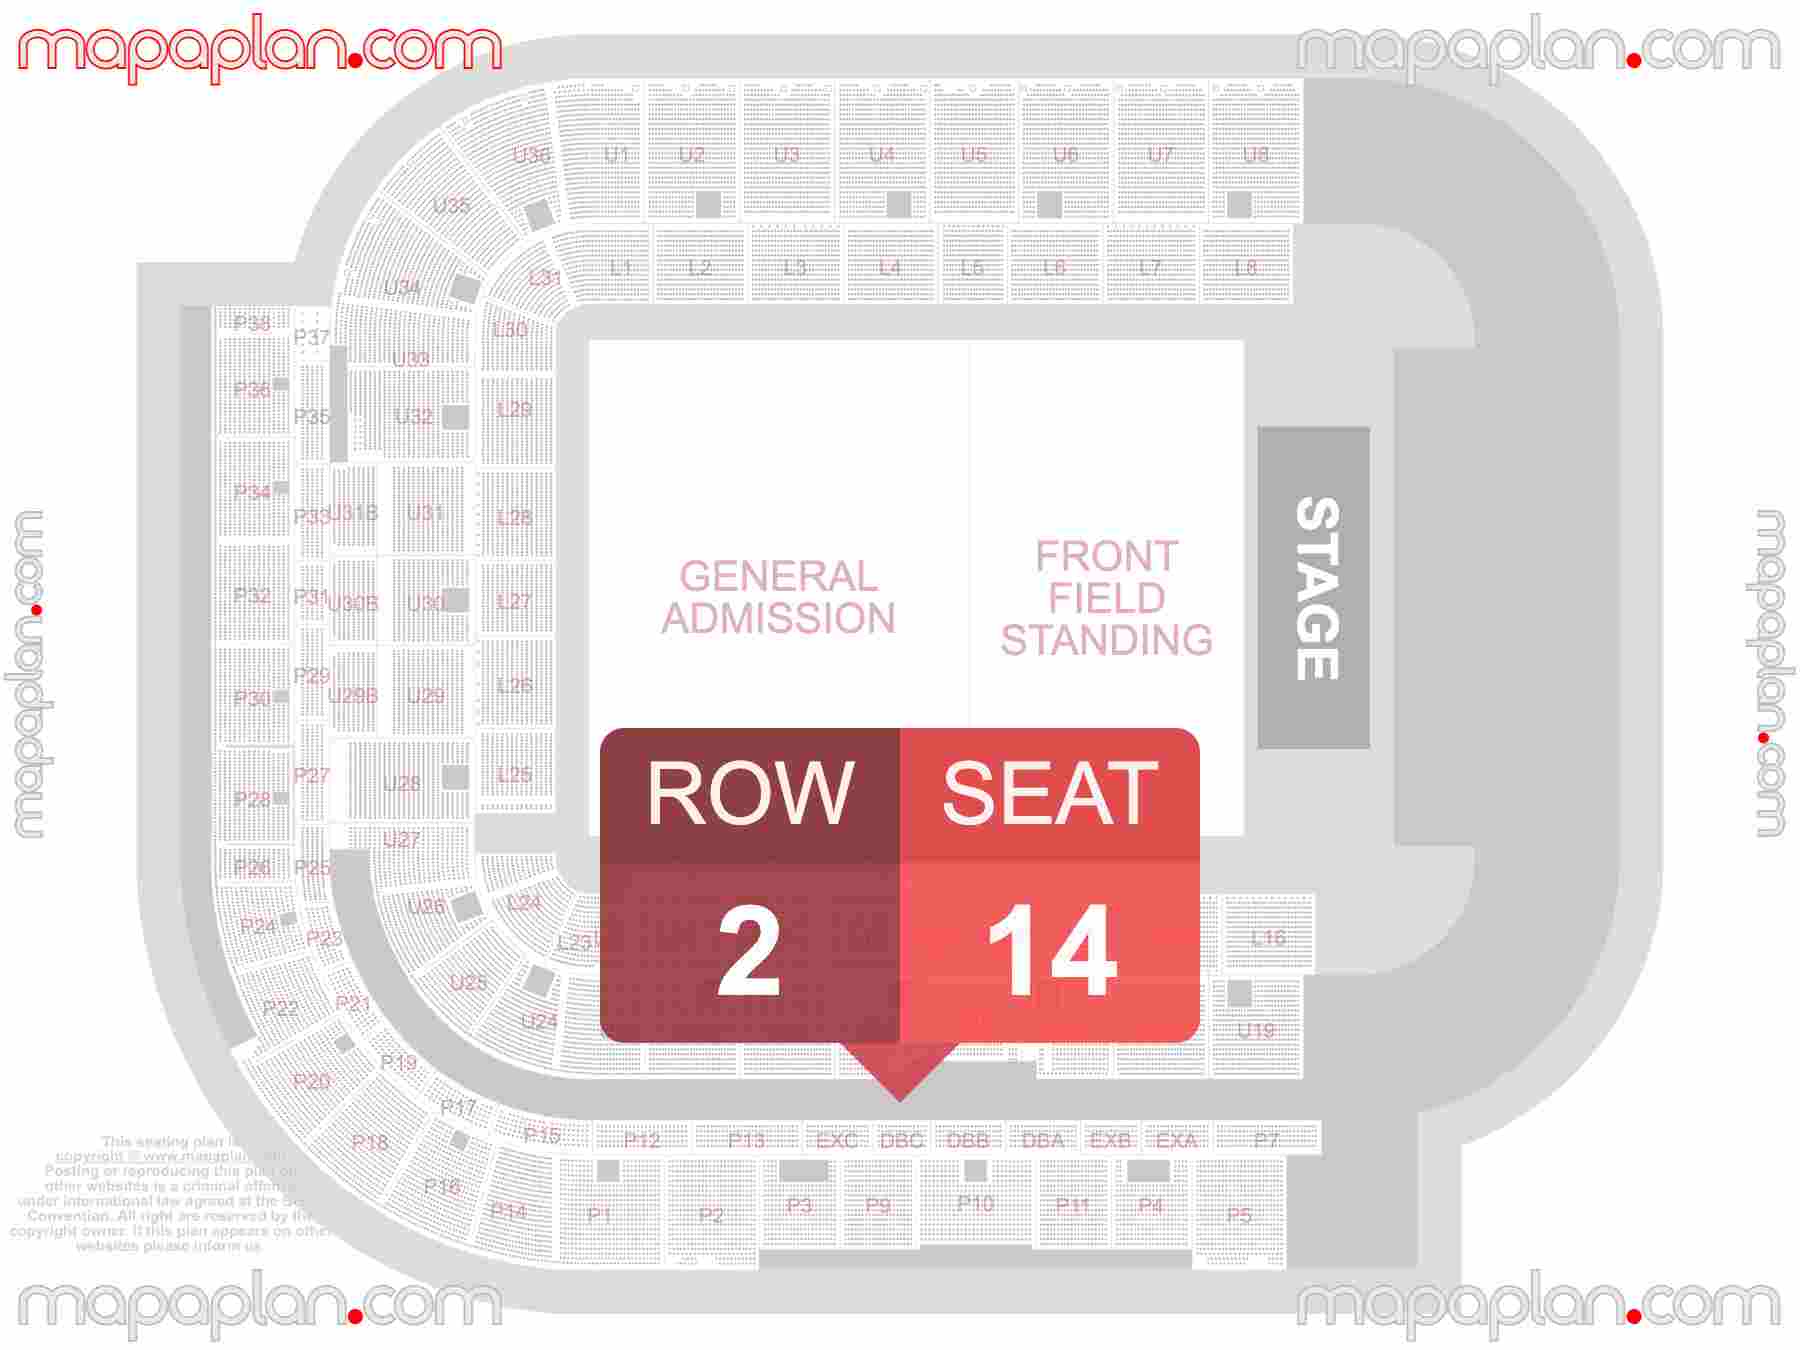 Sunderland Stadium of Light seating plan Concert detailed seat numbers and row numbering plan with interactive map chart layout